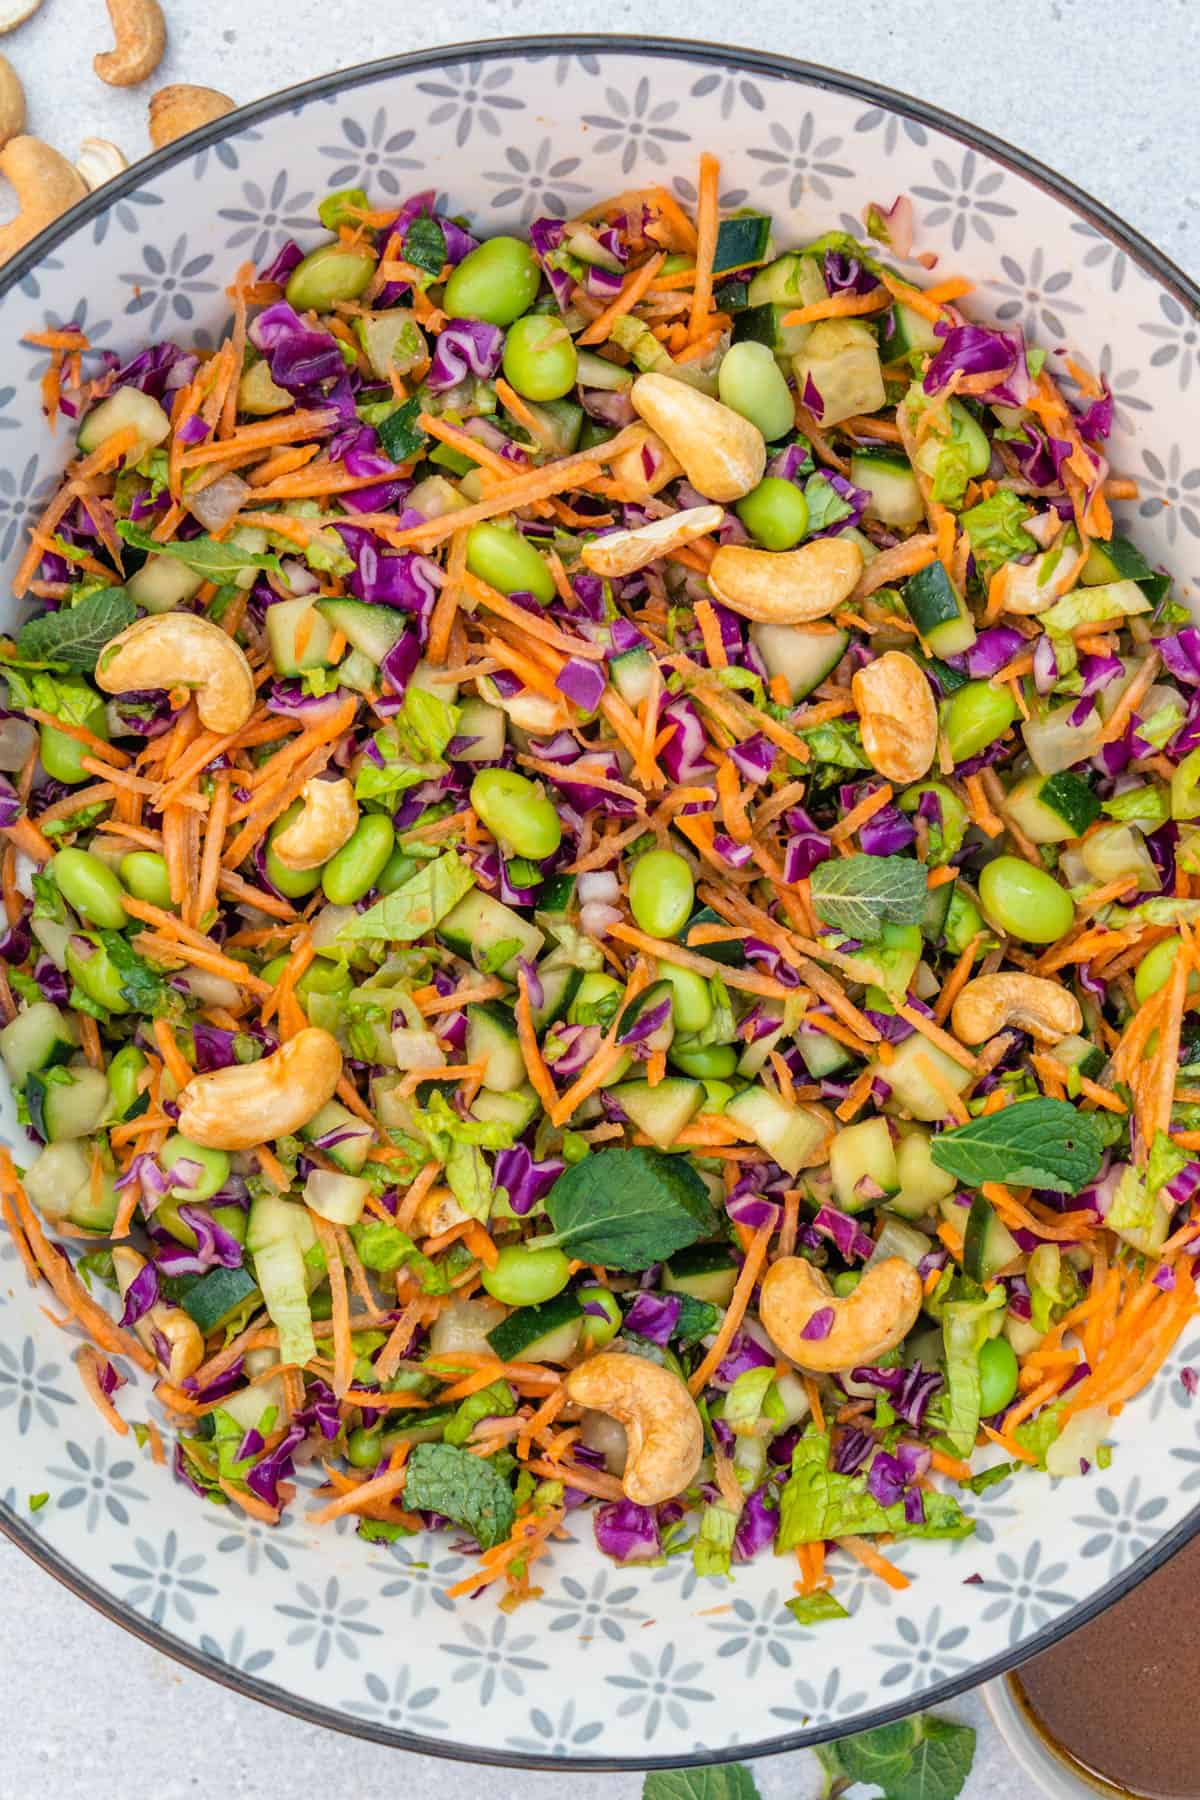 Asian salad chopped in a bowl ready to be served